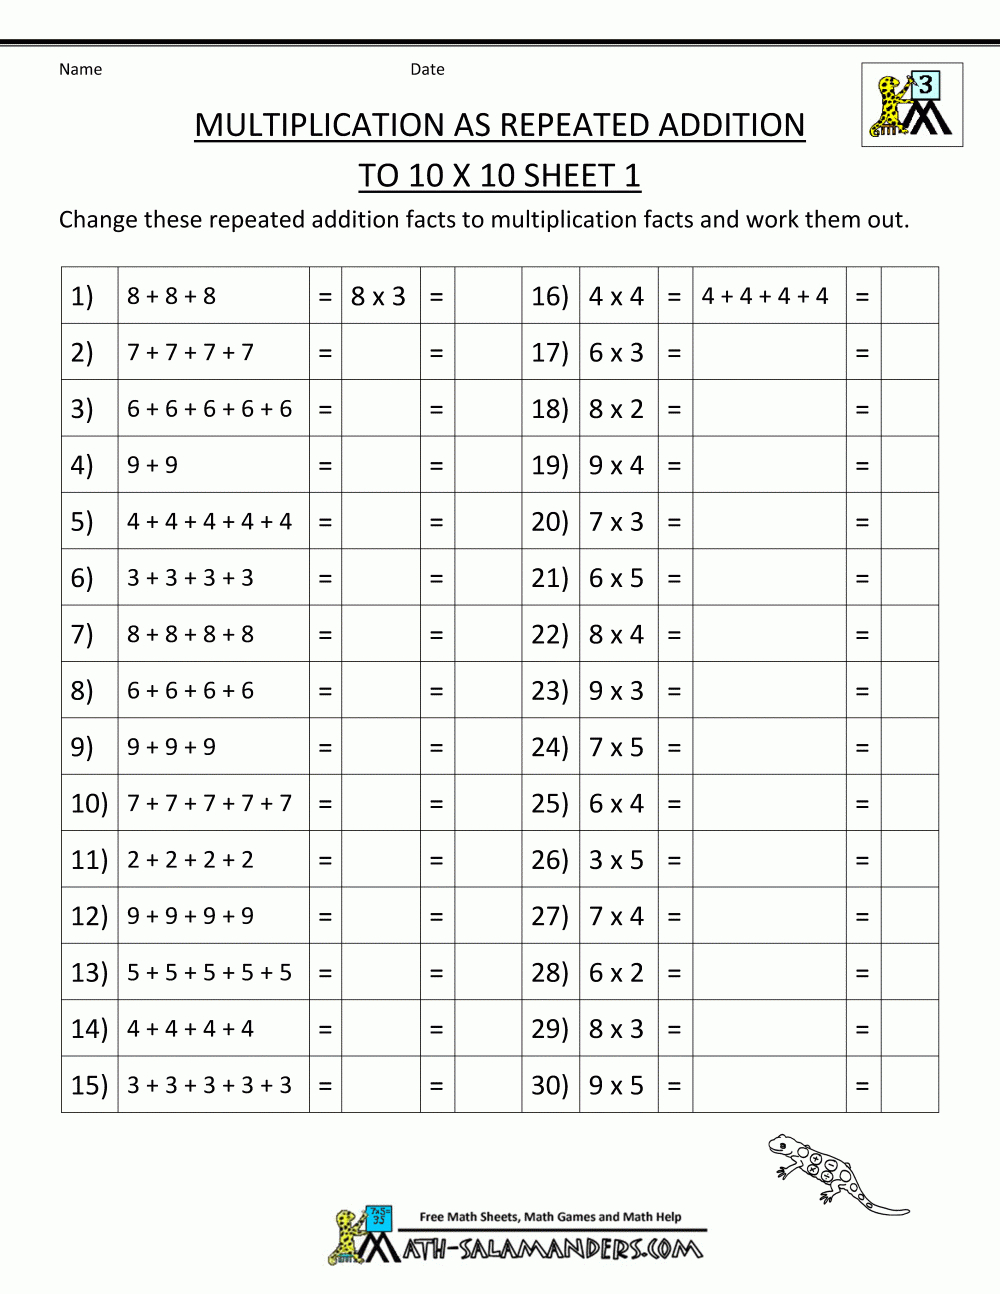 Free Math Sheets Multiplication Addition To 10X10 1 | Classroom - Free Printable Multiplication Sheets